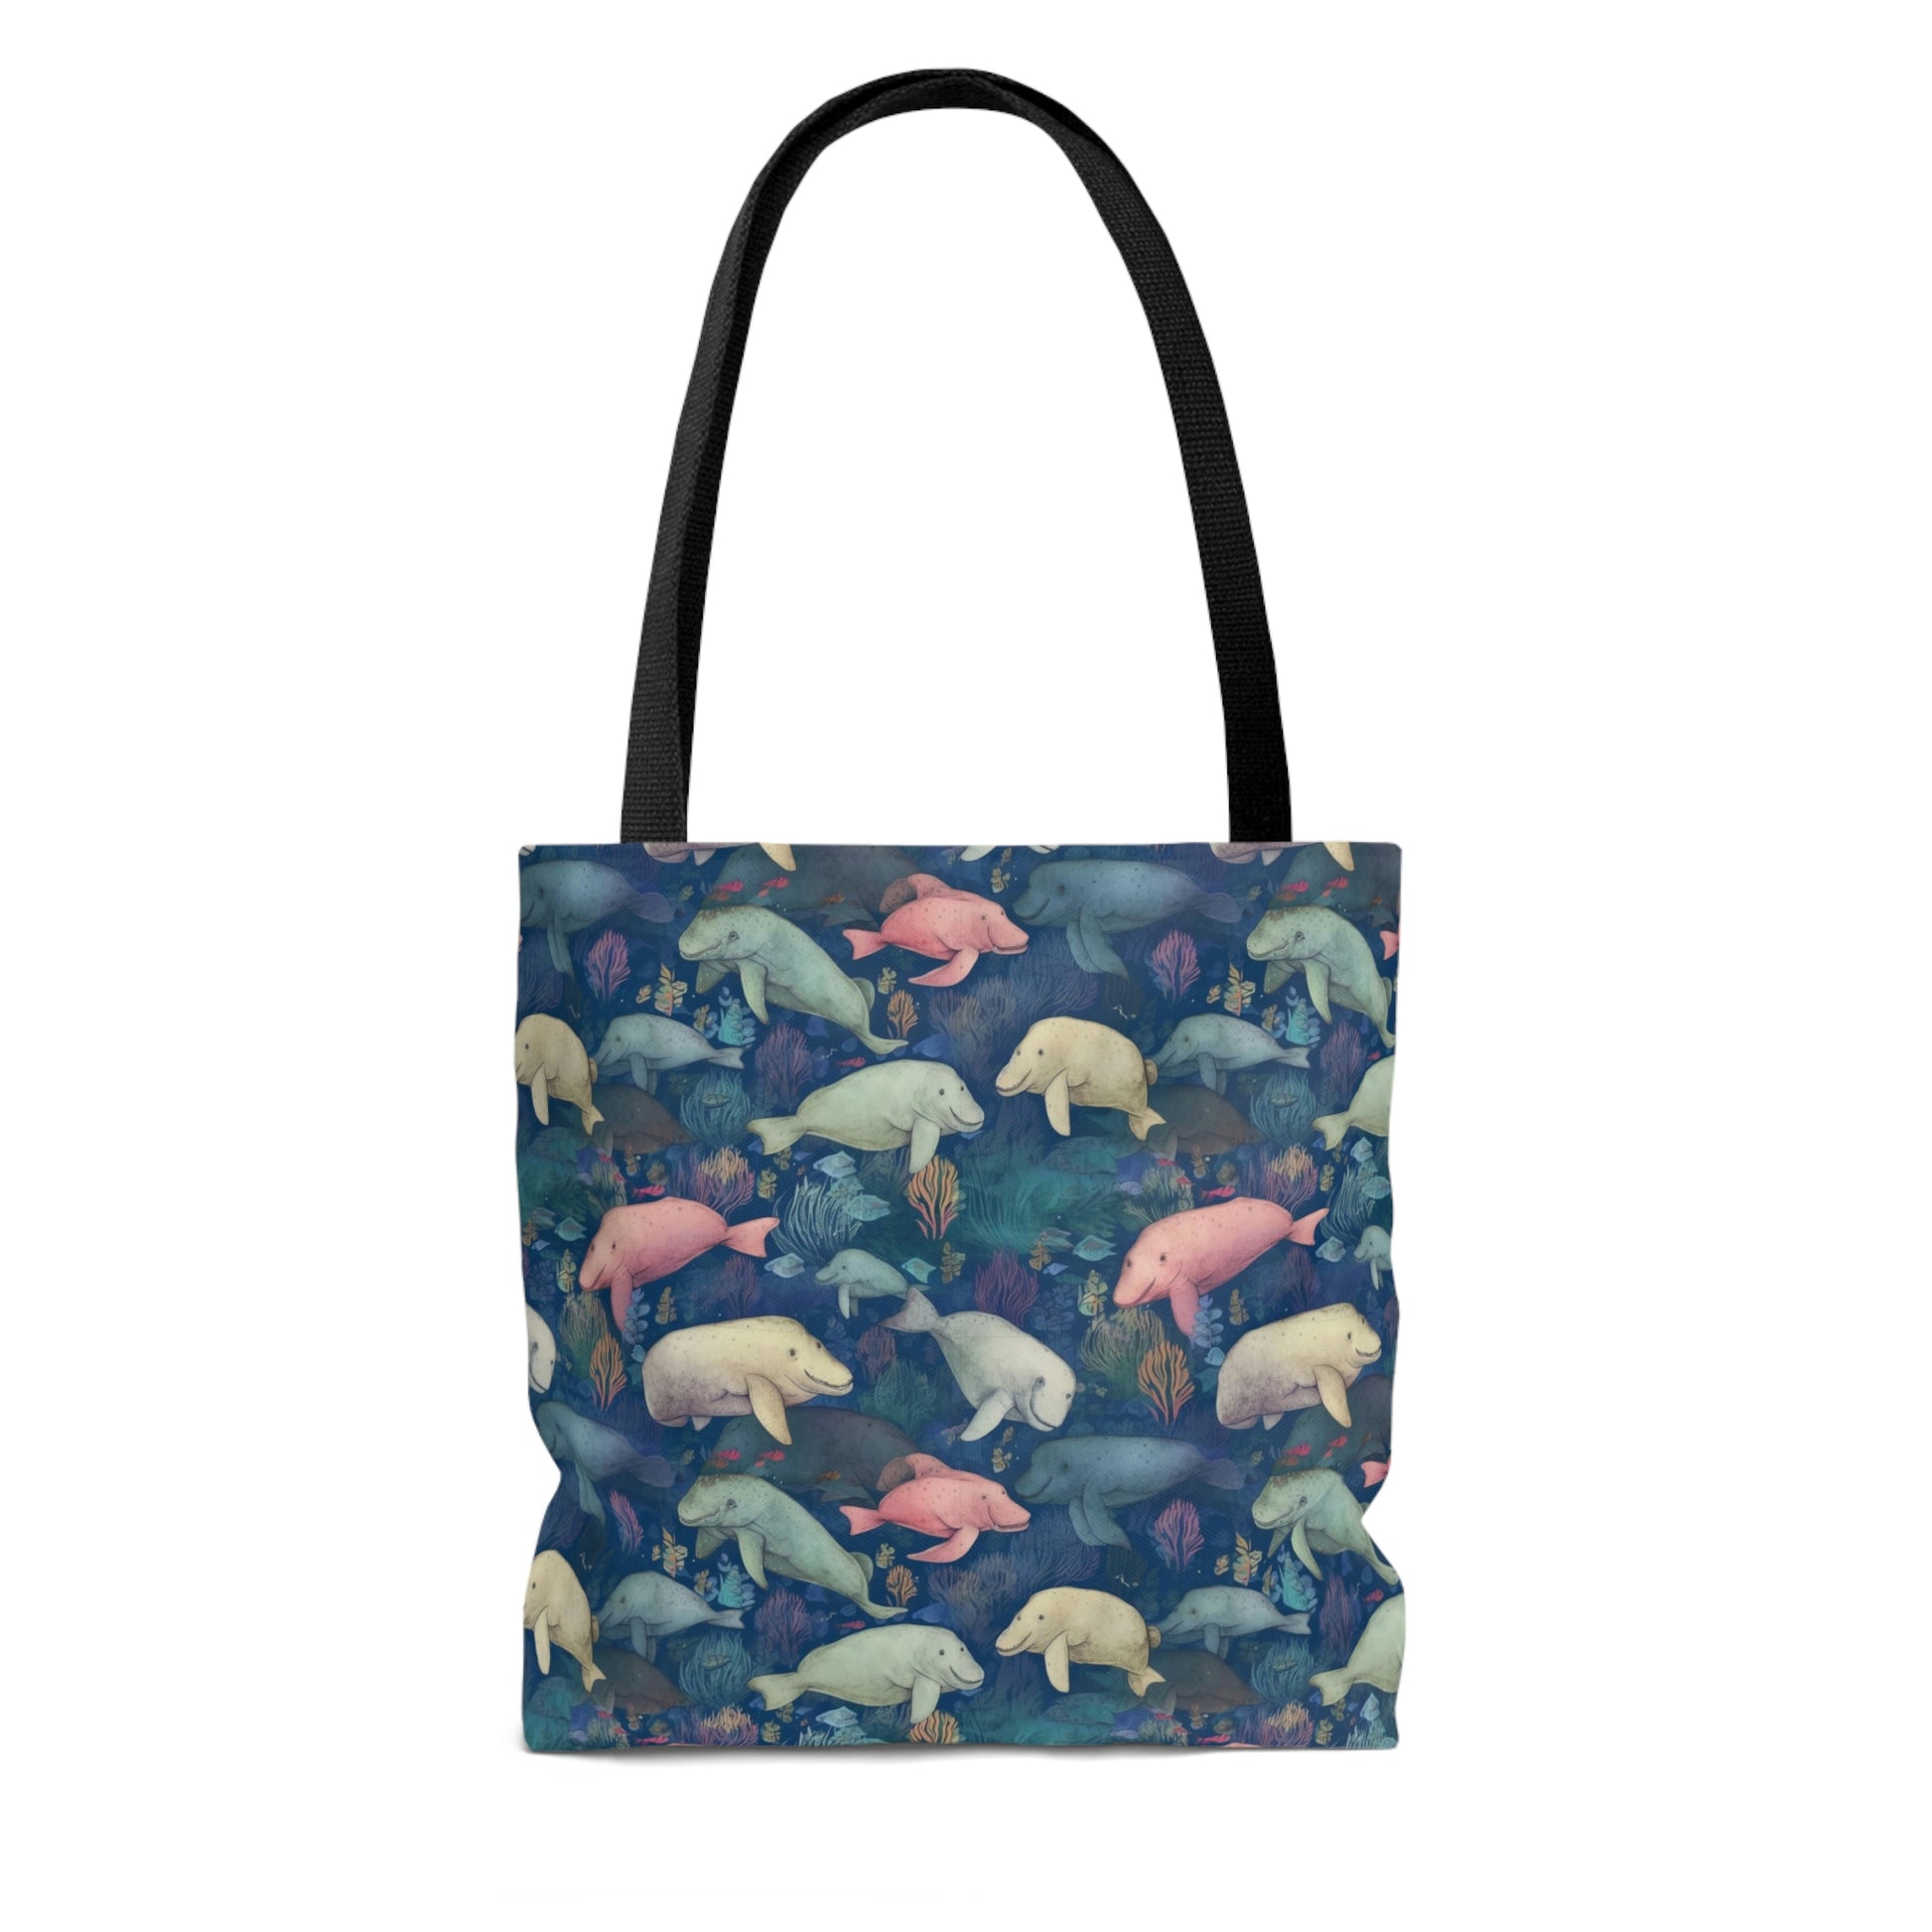 Manatee Tote Bag, Watercolor Blue Ocean Sea Coral Cute Canvas Shopping Small Large Travel Reusable Aesthetic Shoulder Bag Starcove Fashion